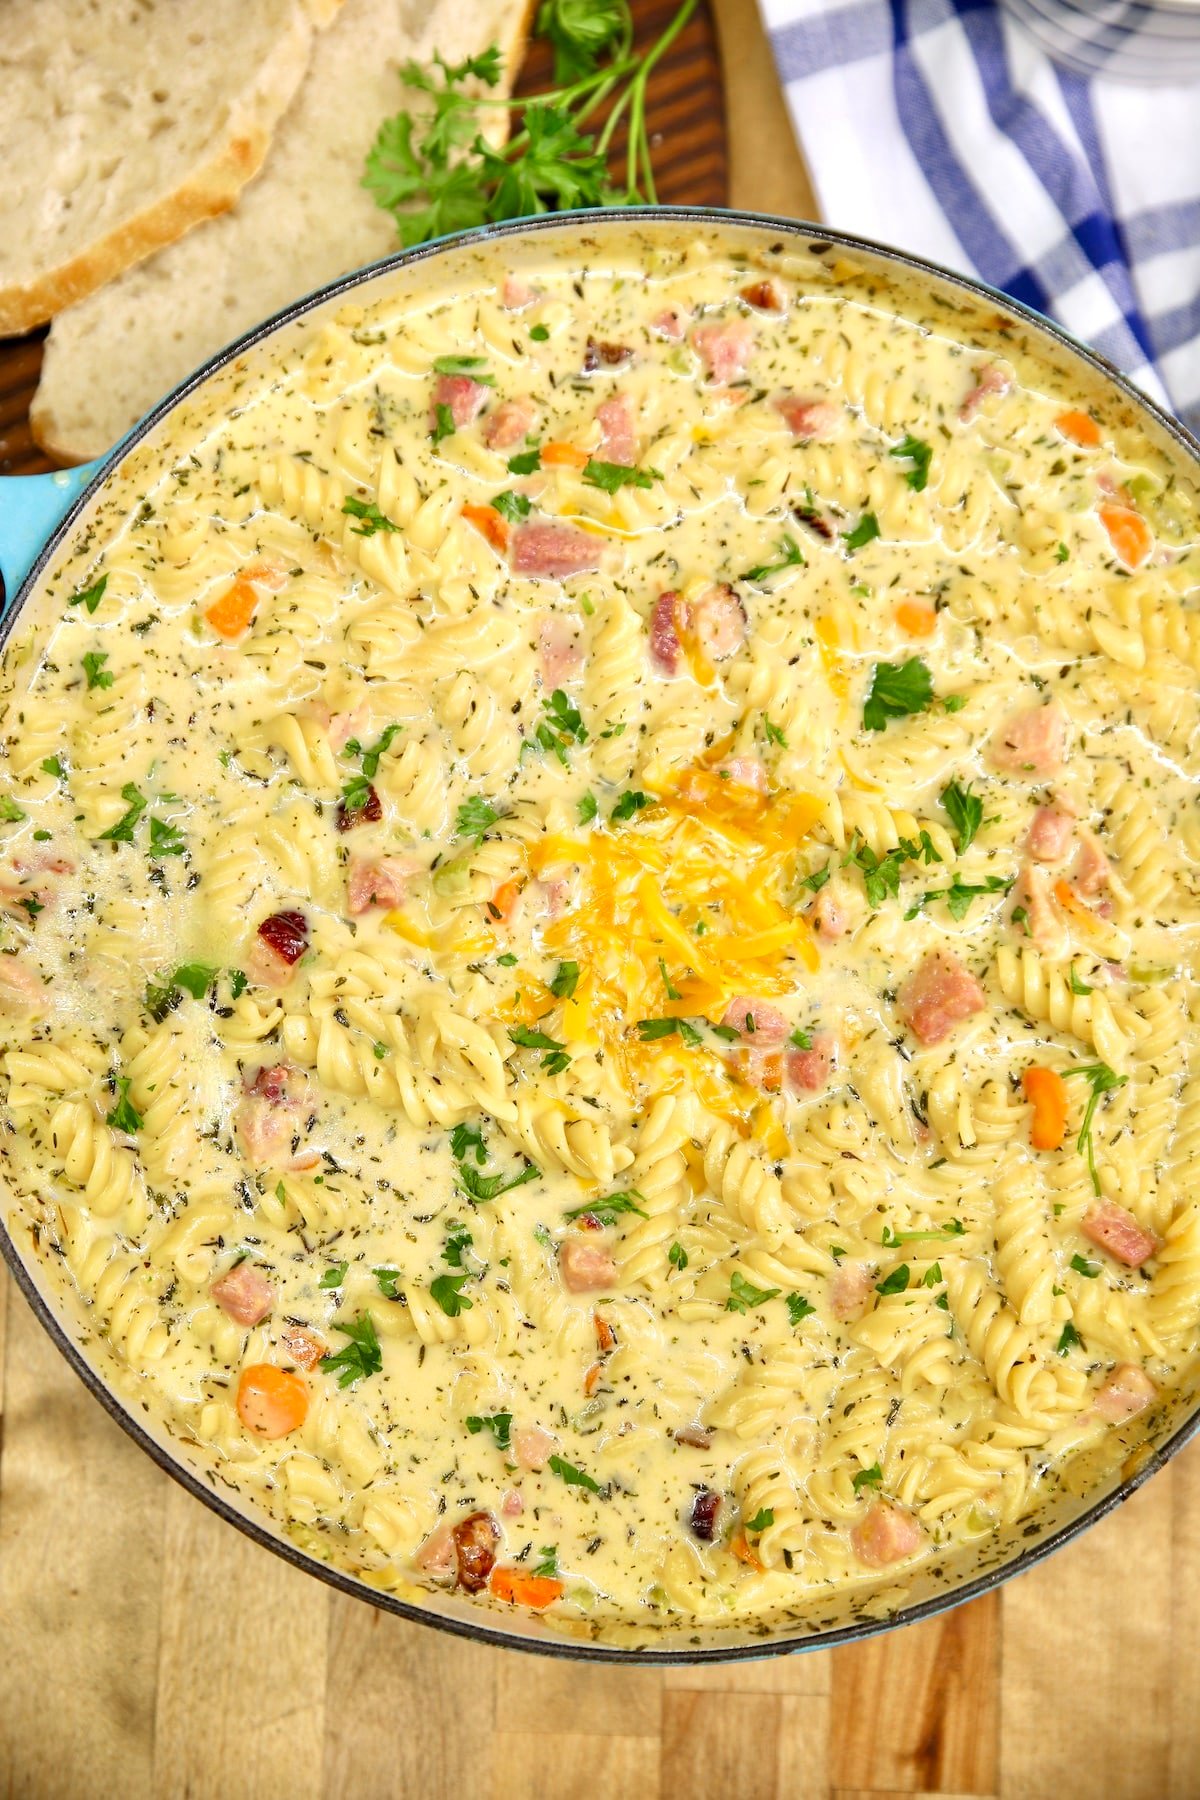 Pan of ham and cheese soup with vegetables and pasta.